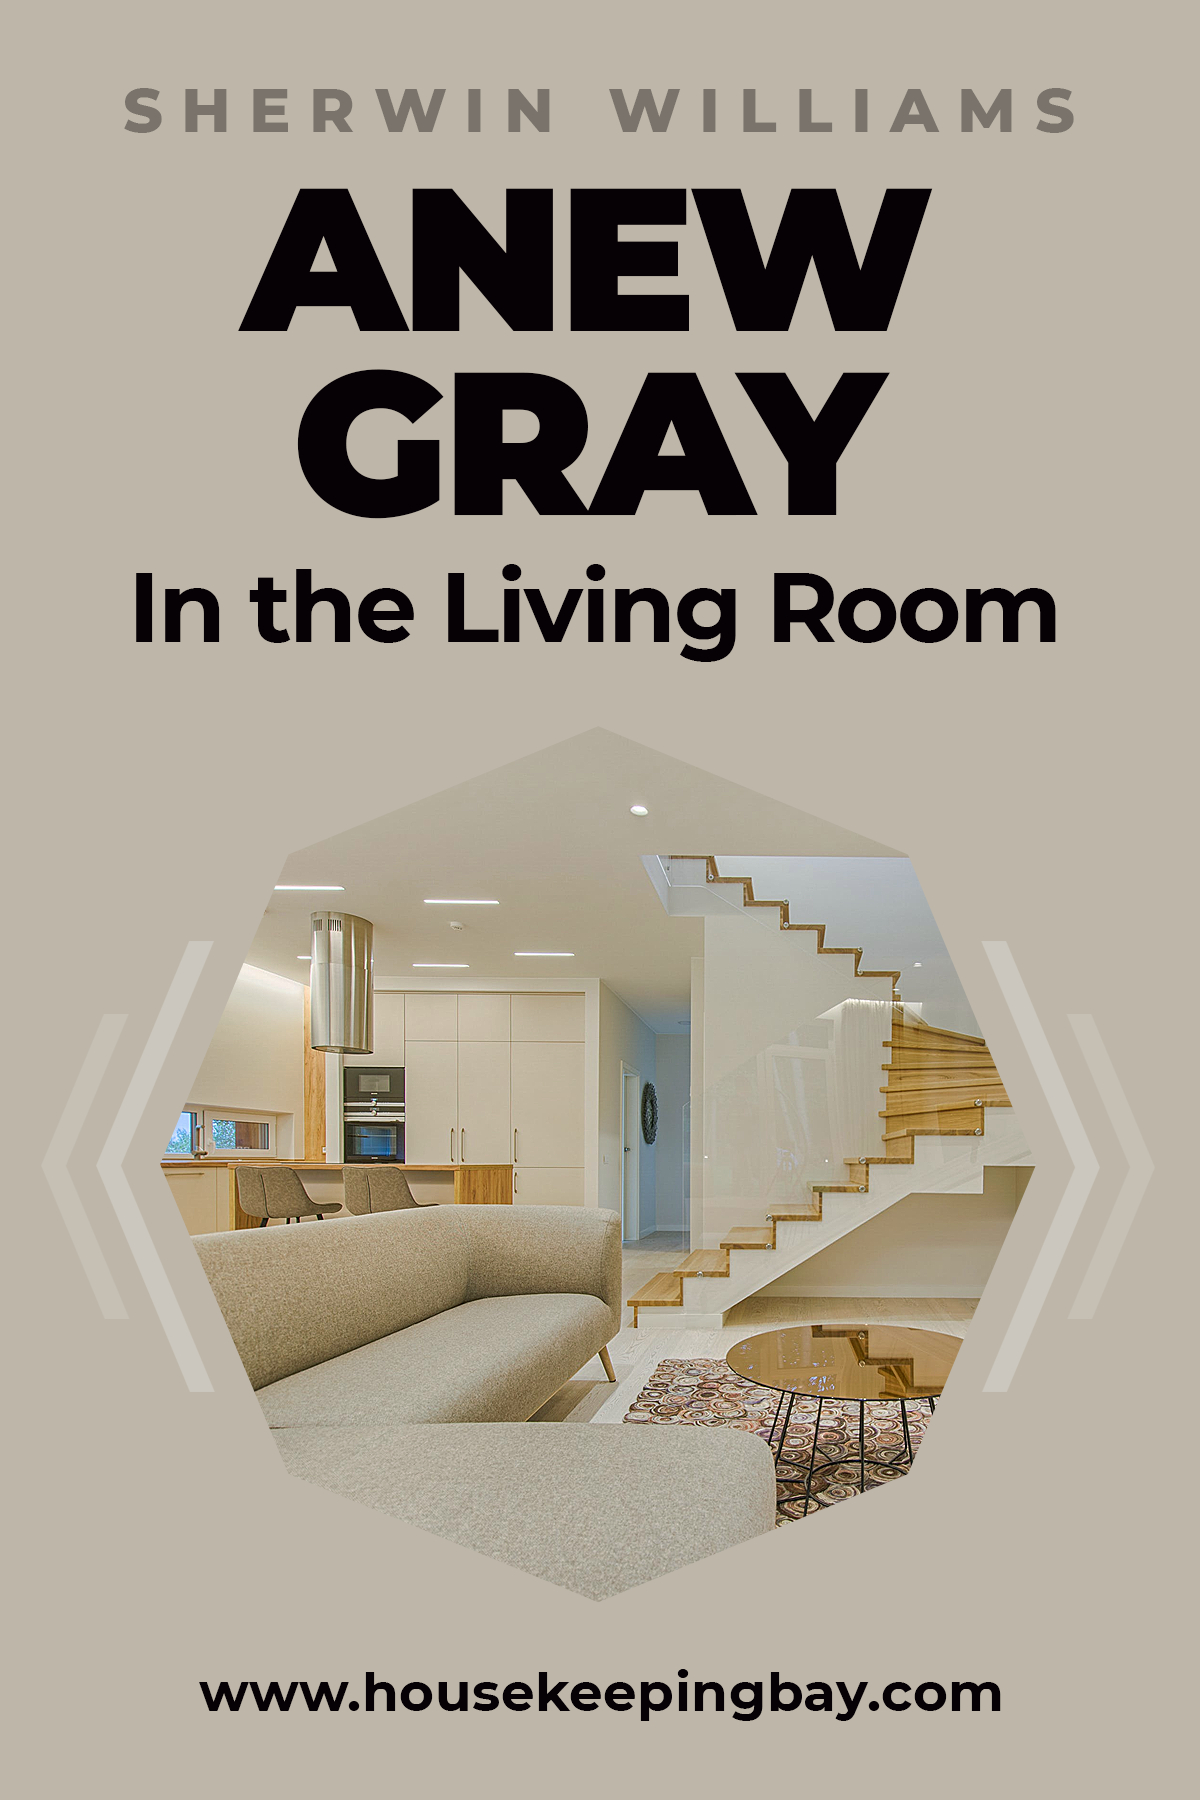 Anew Gray In the Living Room